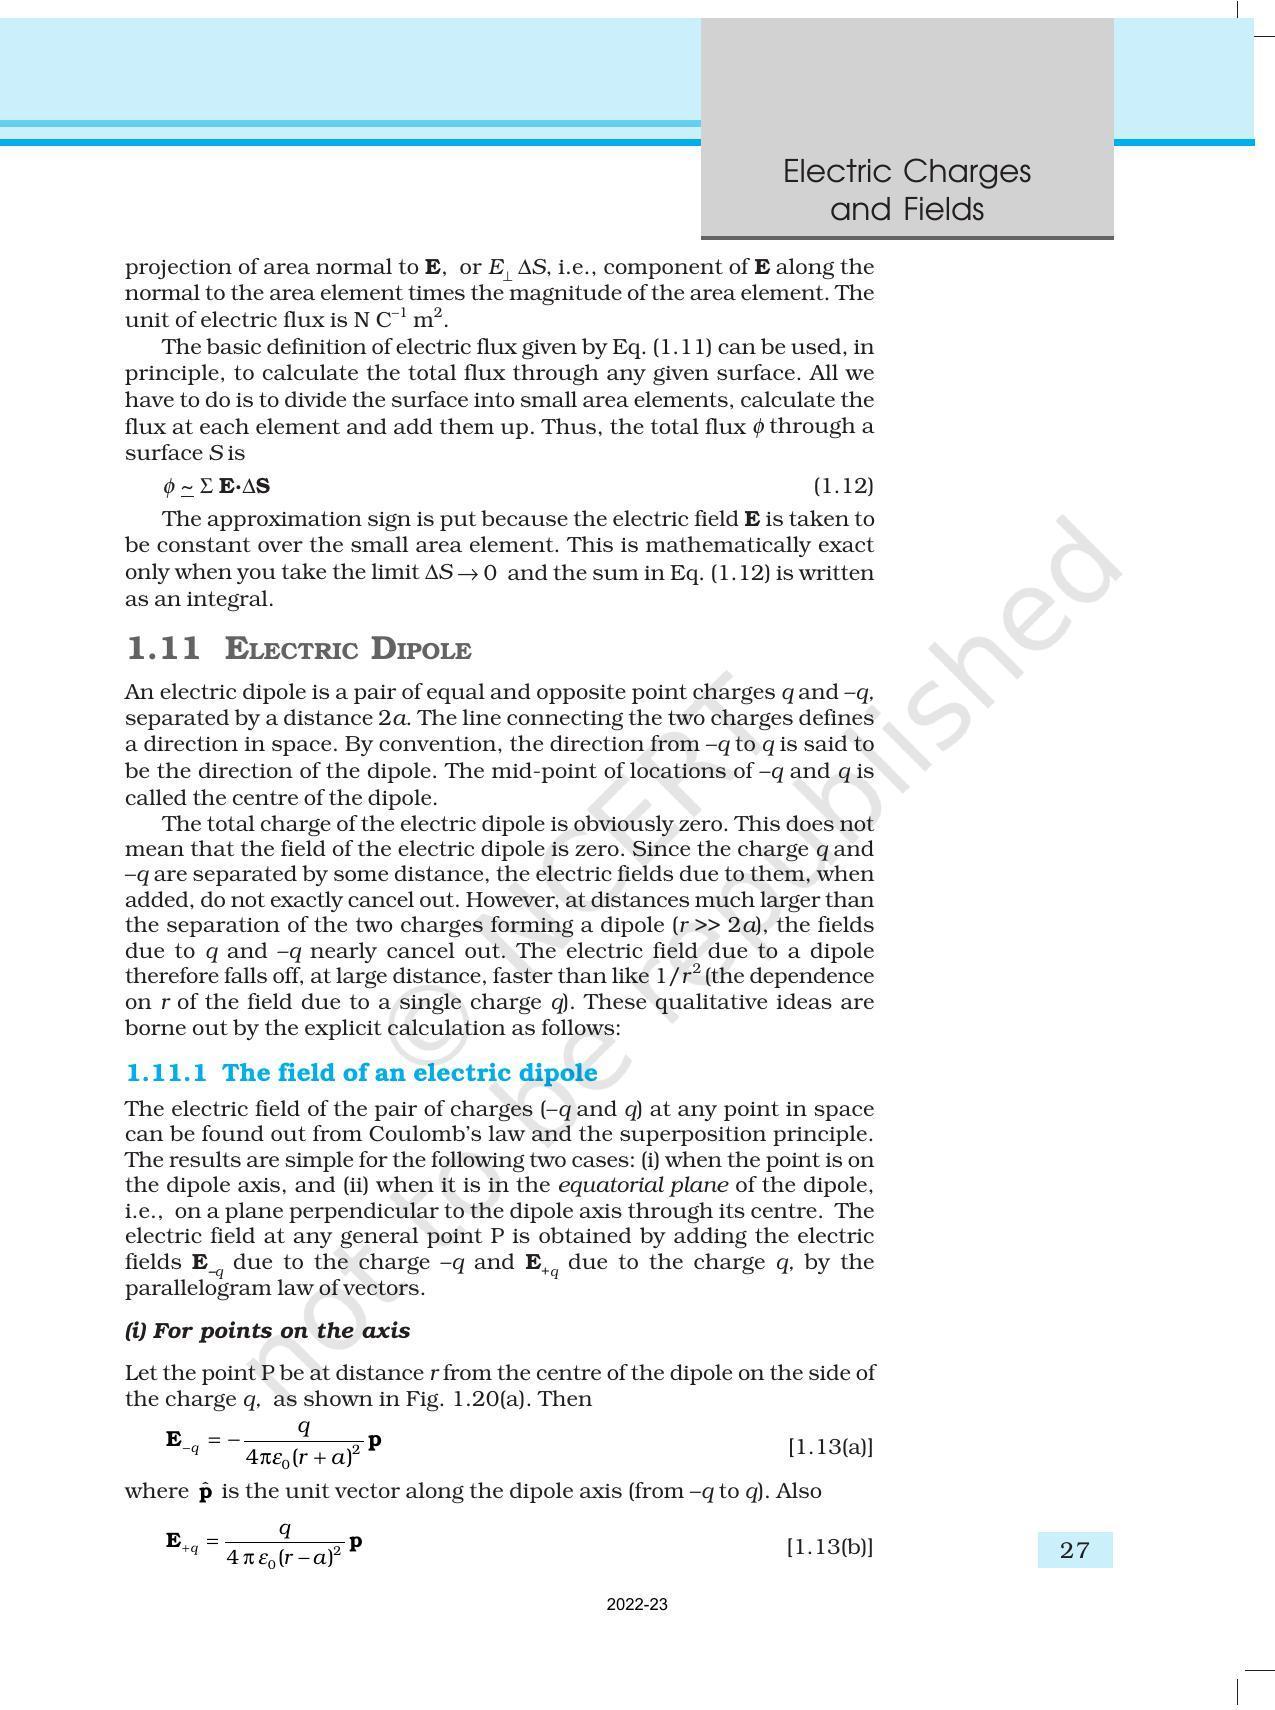 NCERT Book for Class 12 Physics Chapter 1 Electric Charges and Fields - Page 27